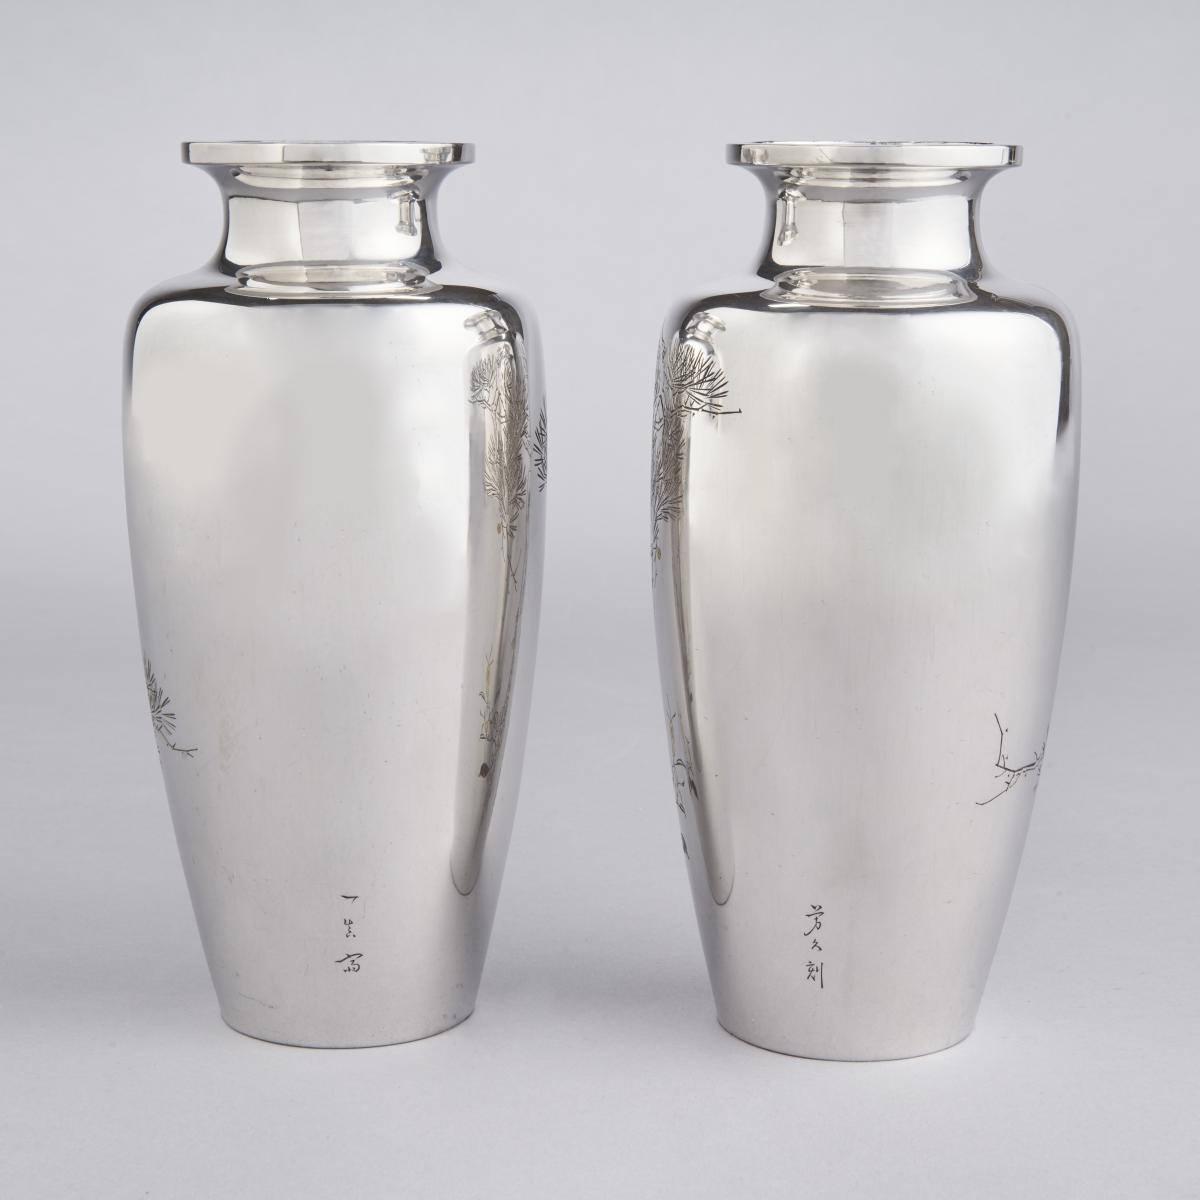 Japanese pair of silver vases with birds, signed Isshinsai Yoshihisa koku with seal of the Shobido Studio and Jungin mark, Meiji Period.